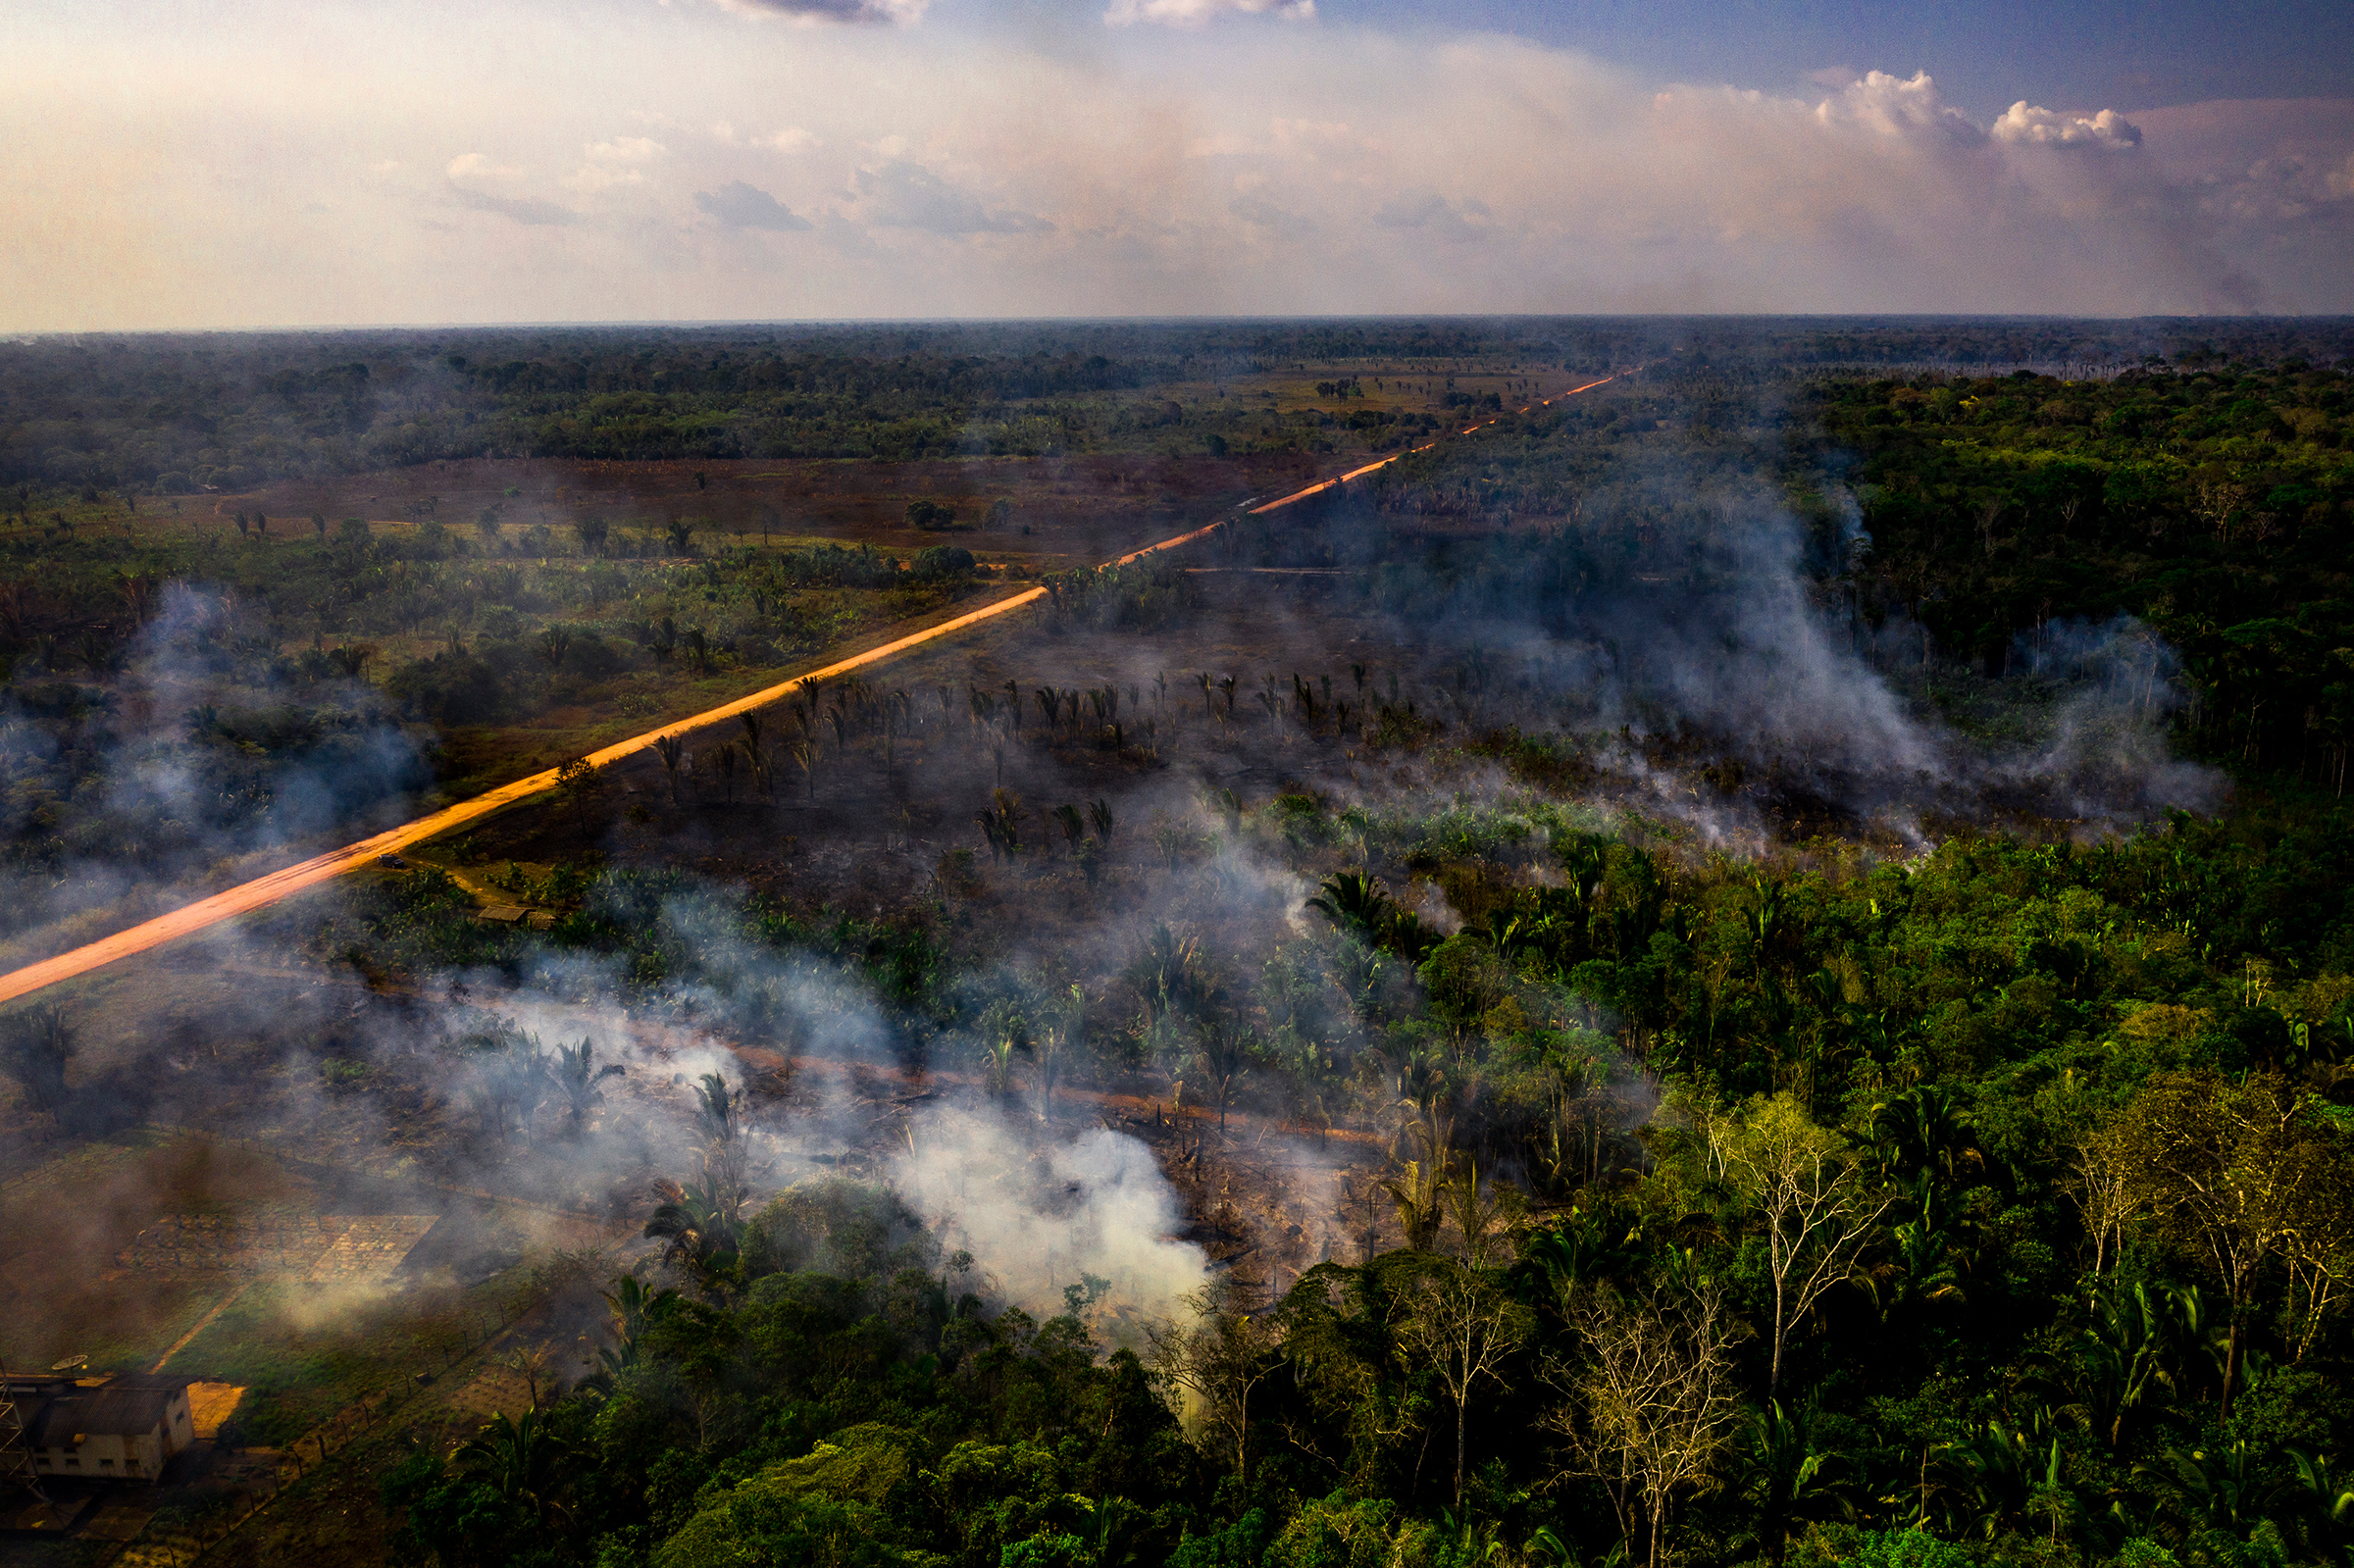 Smoke rises from fires near Realidade on Aug. 26. (Sebastián Liste—NOOR for TIME)